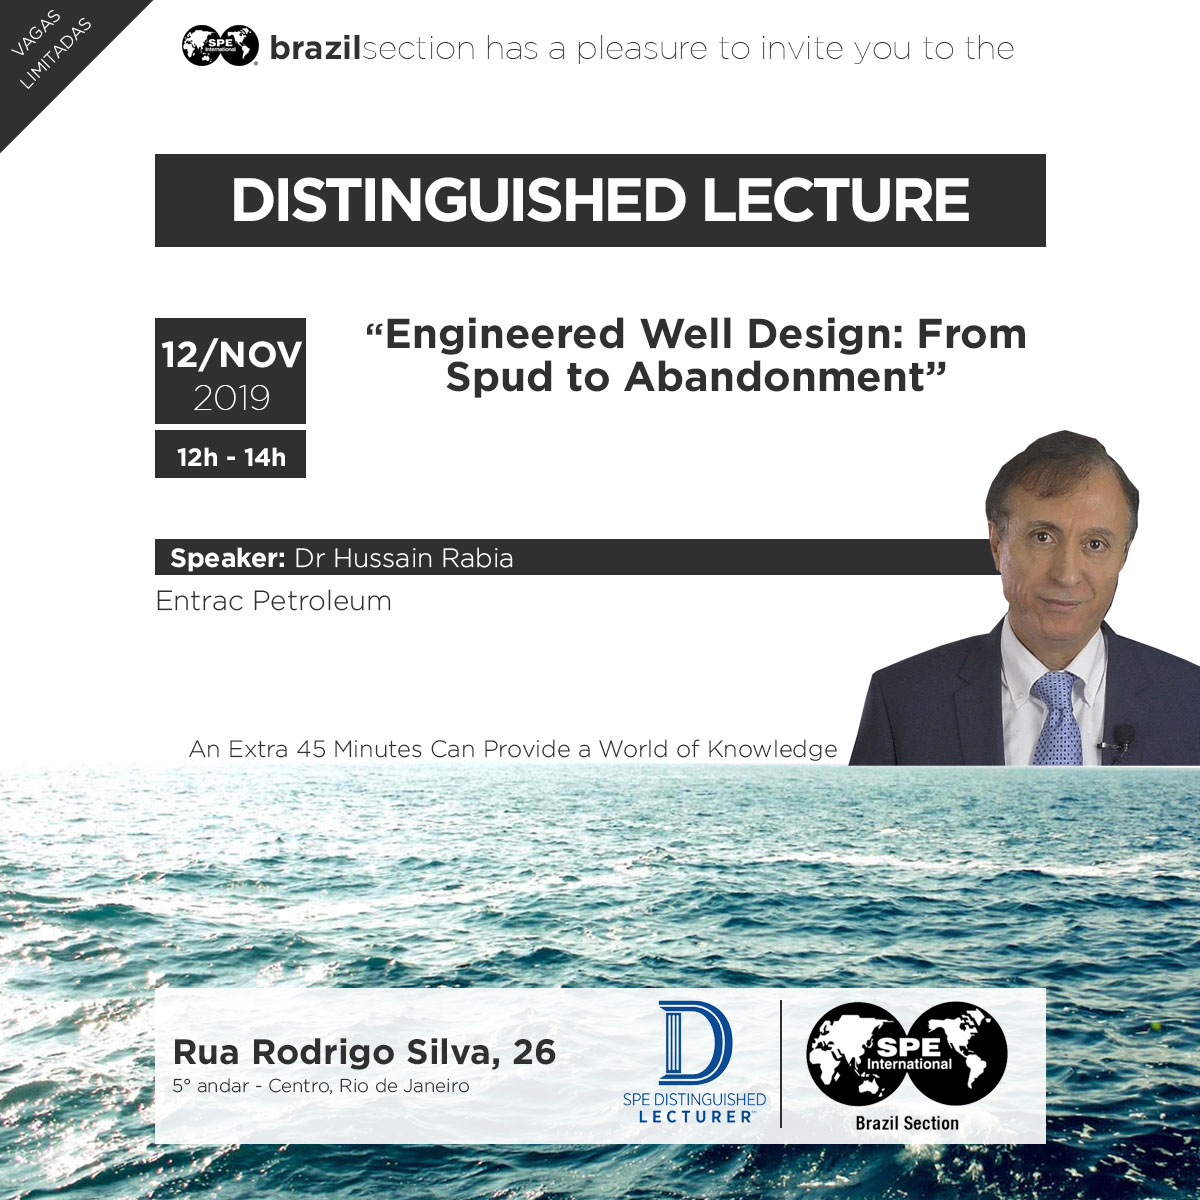 Distinguished Lecturer: “Engineered Well Design: From Spud to Abandonment”